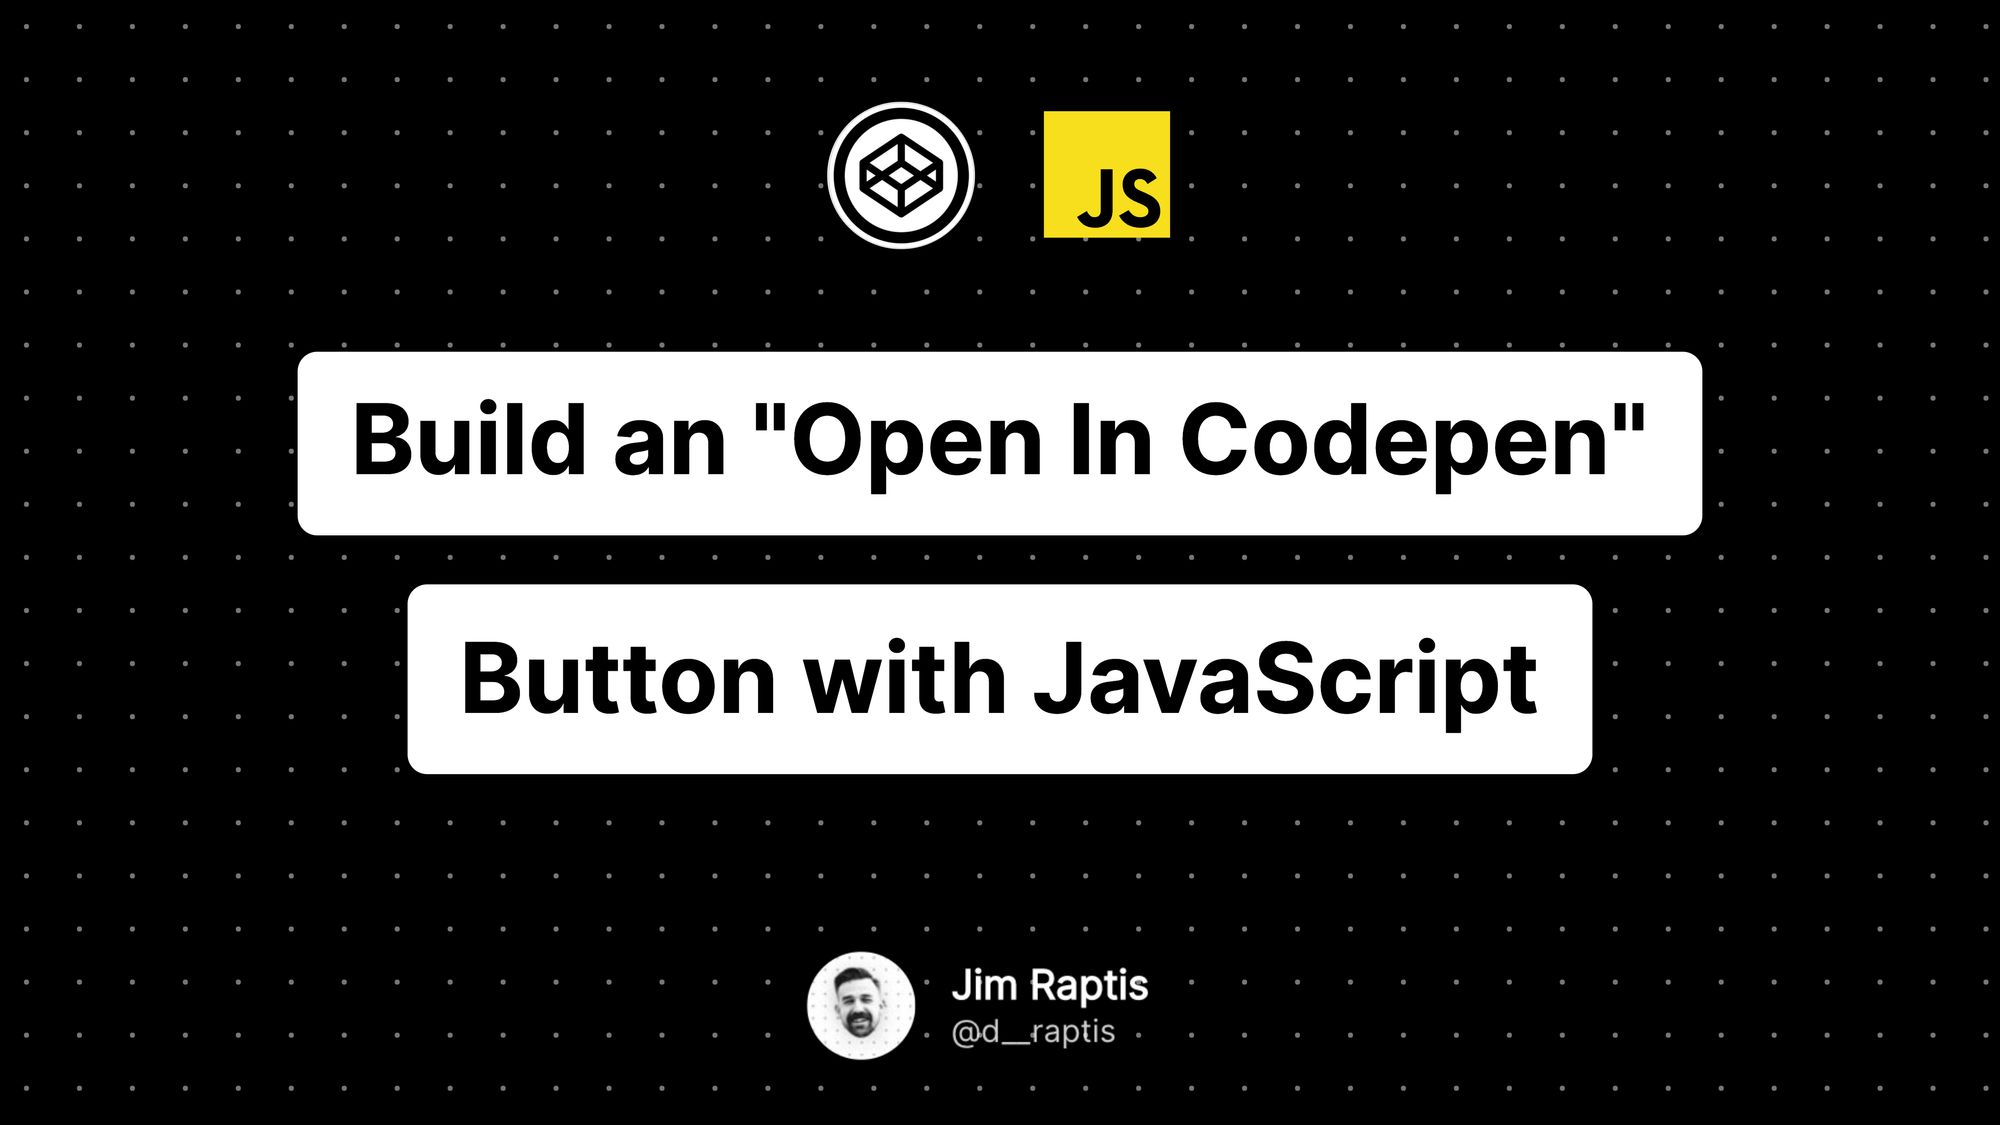 How to build an “Open in Codepen” button in JavaScript